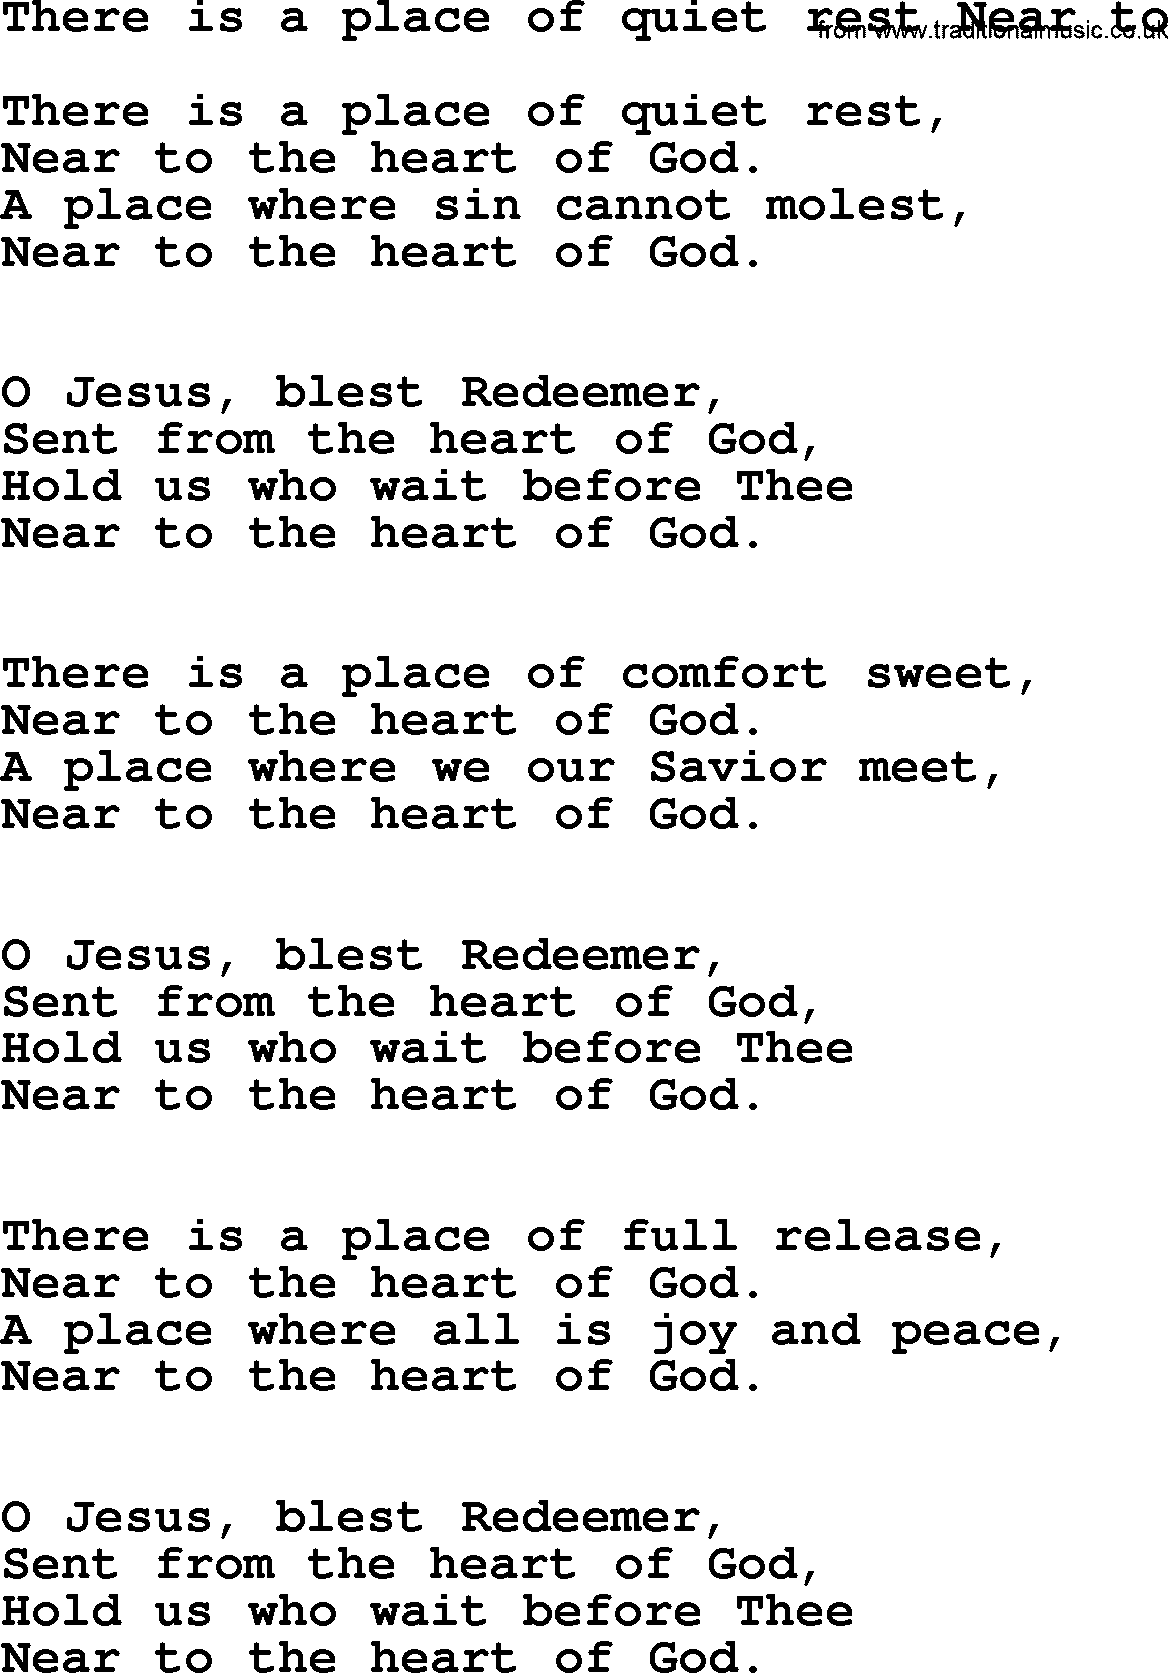 Presbyterian Hymns collection, Hymn: There Is A Place Of Quiet Rest Near To, lyrics and PDF